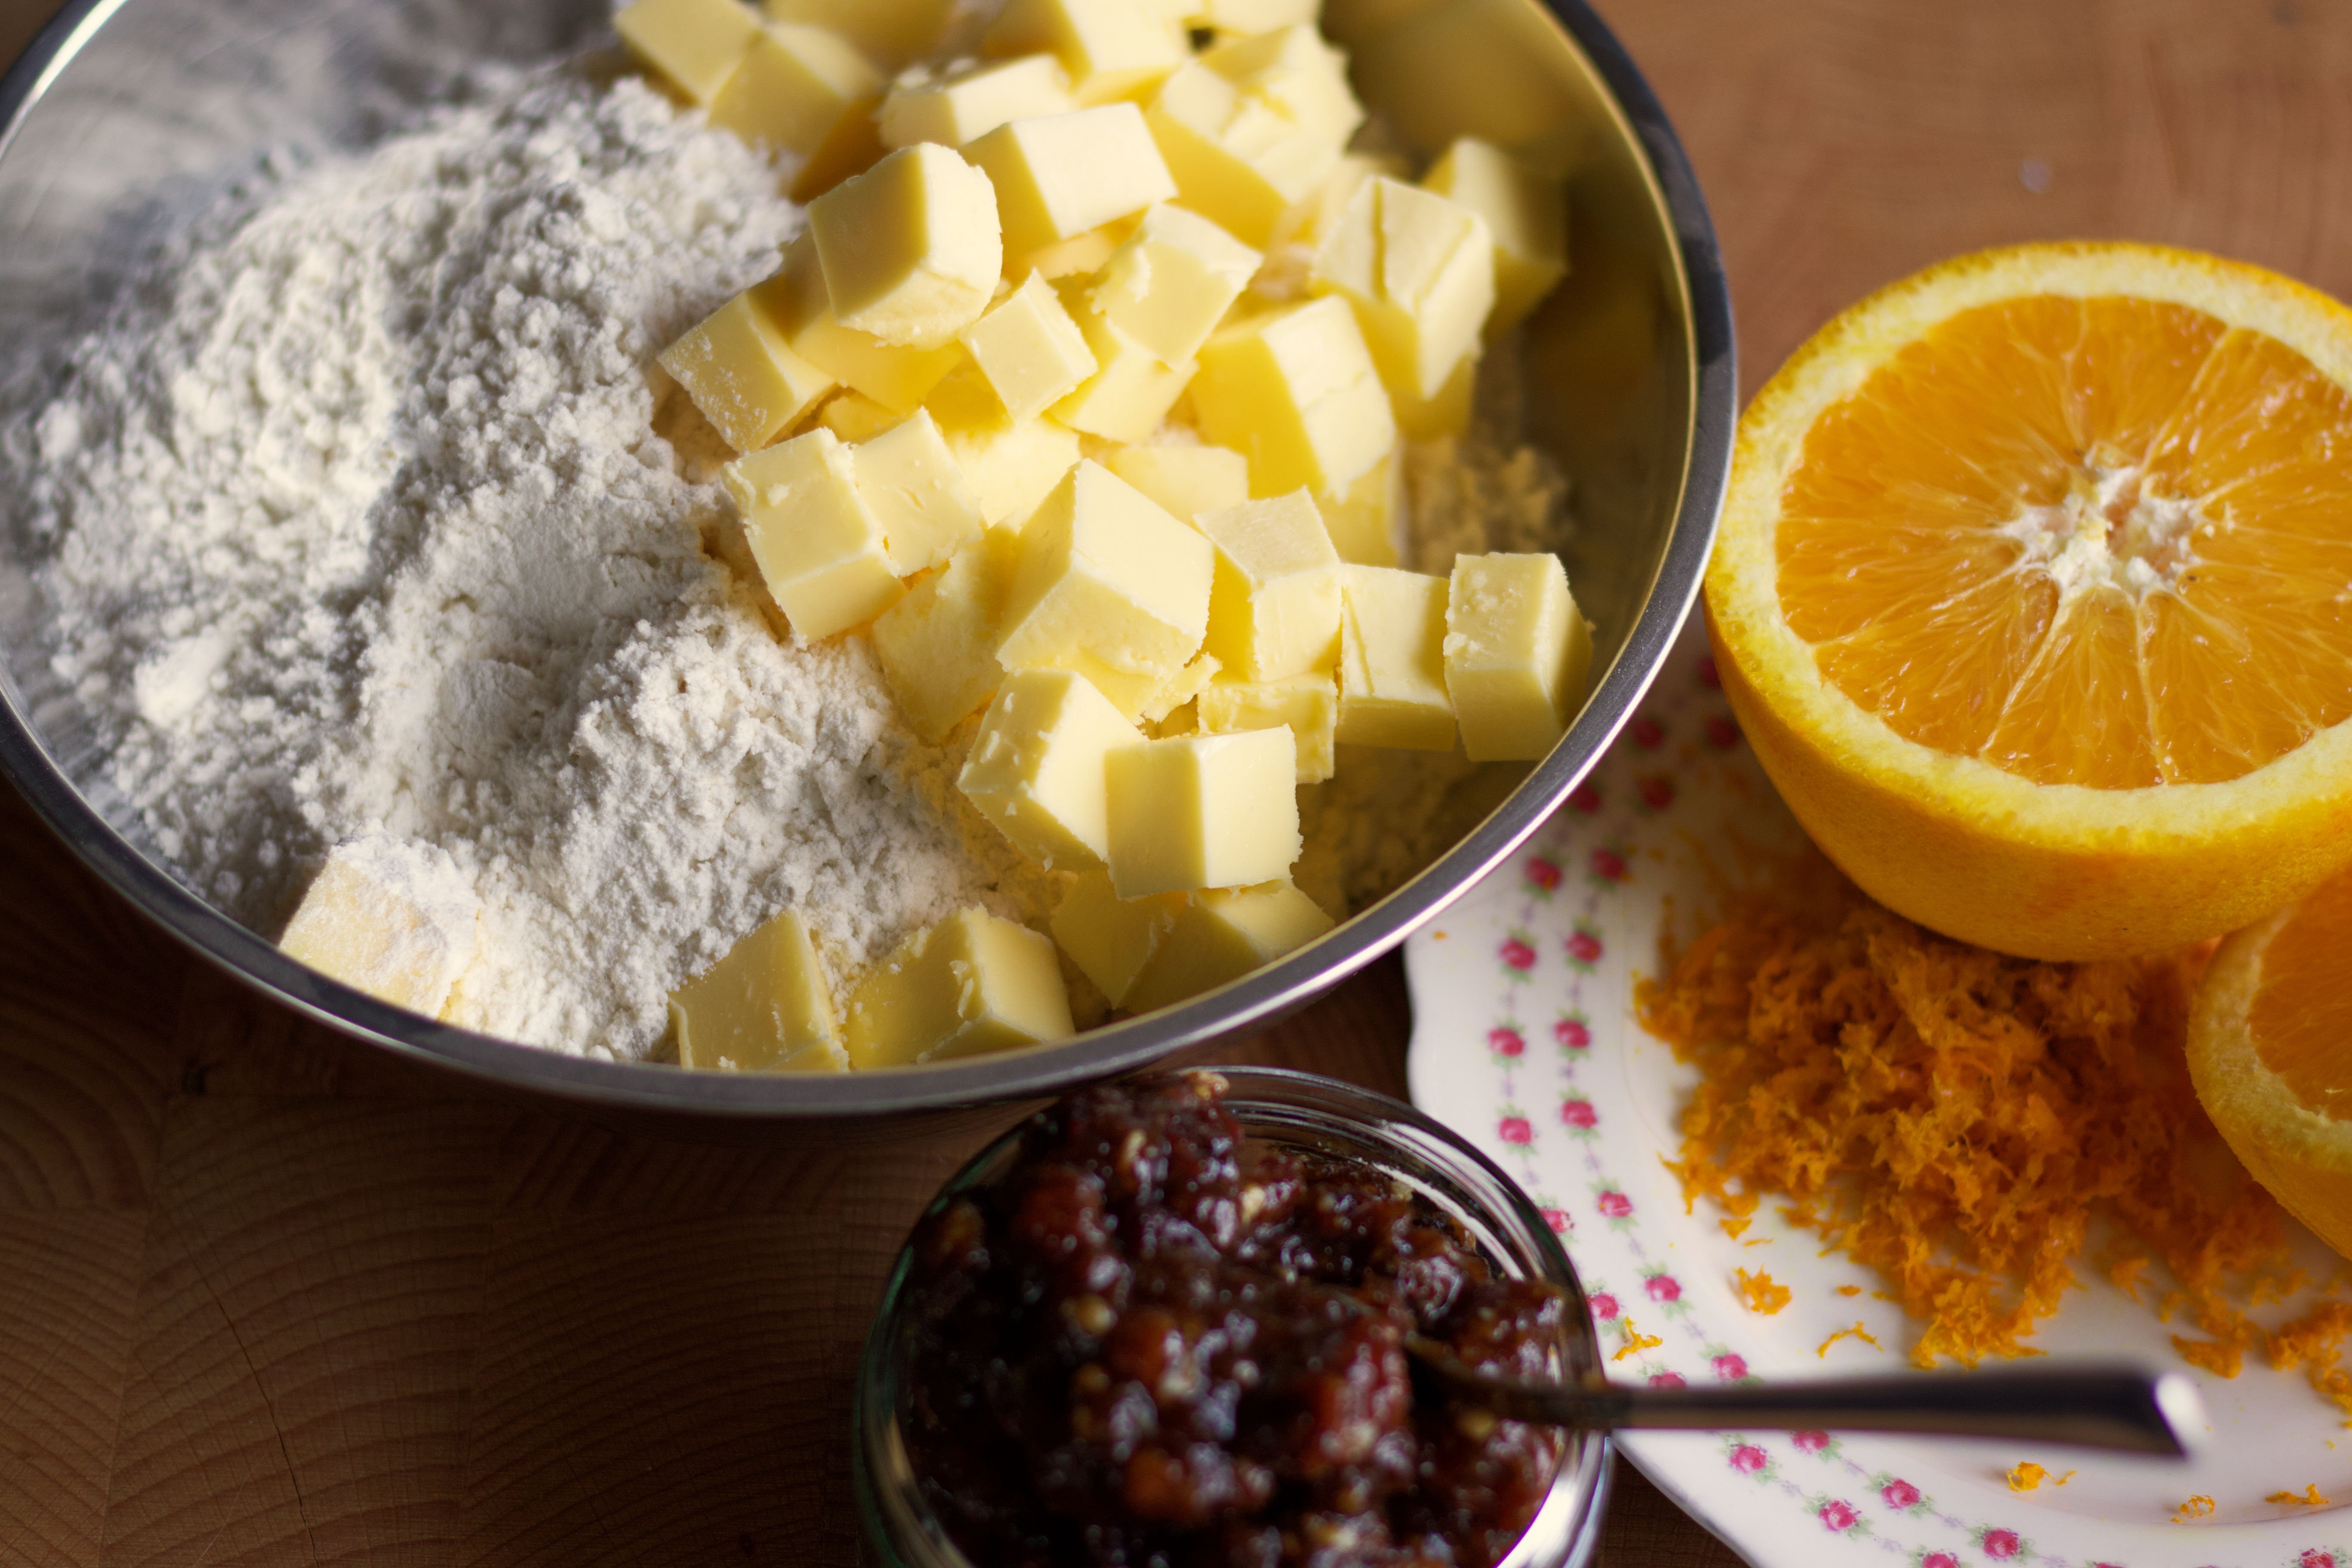 Ingredients for making mince pies, butter, flour, orange, mincemeat